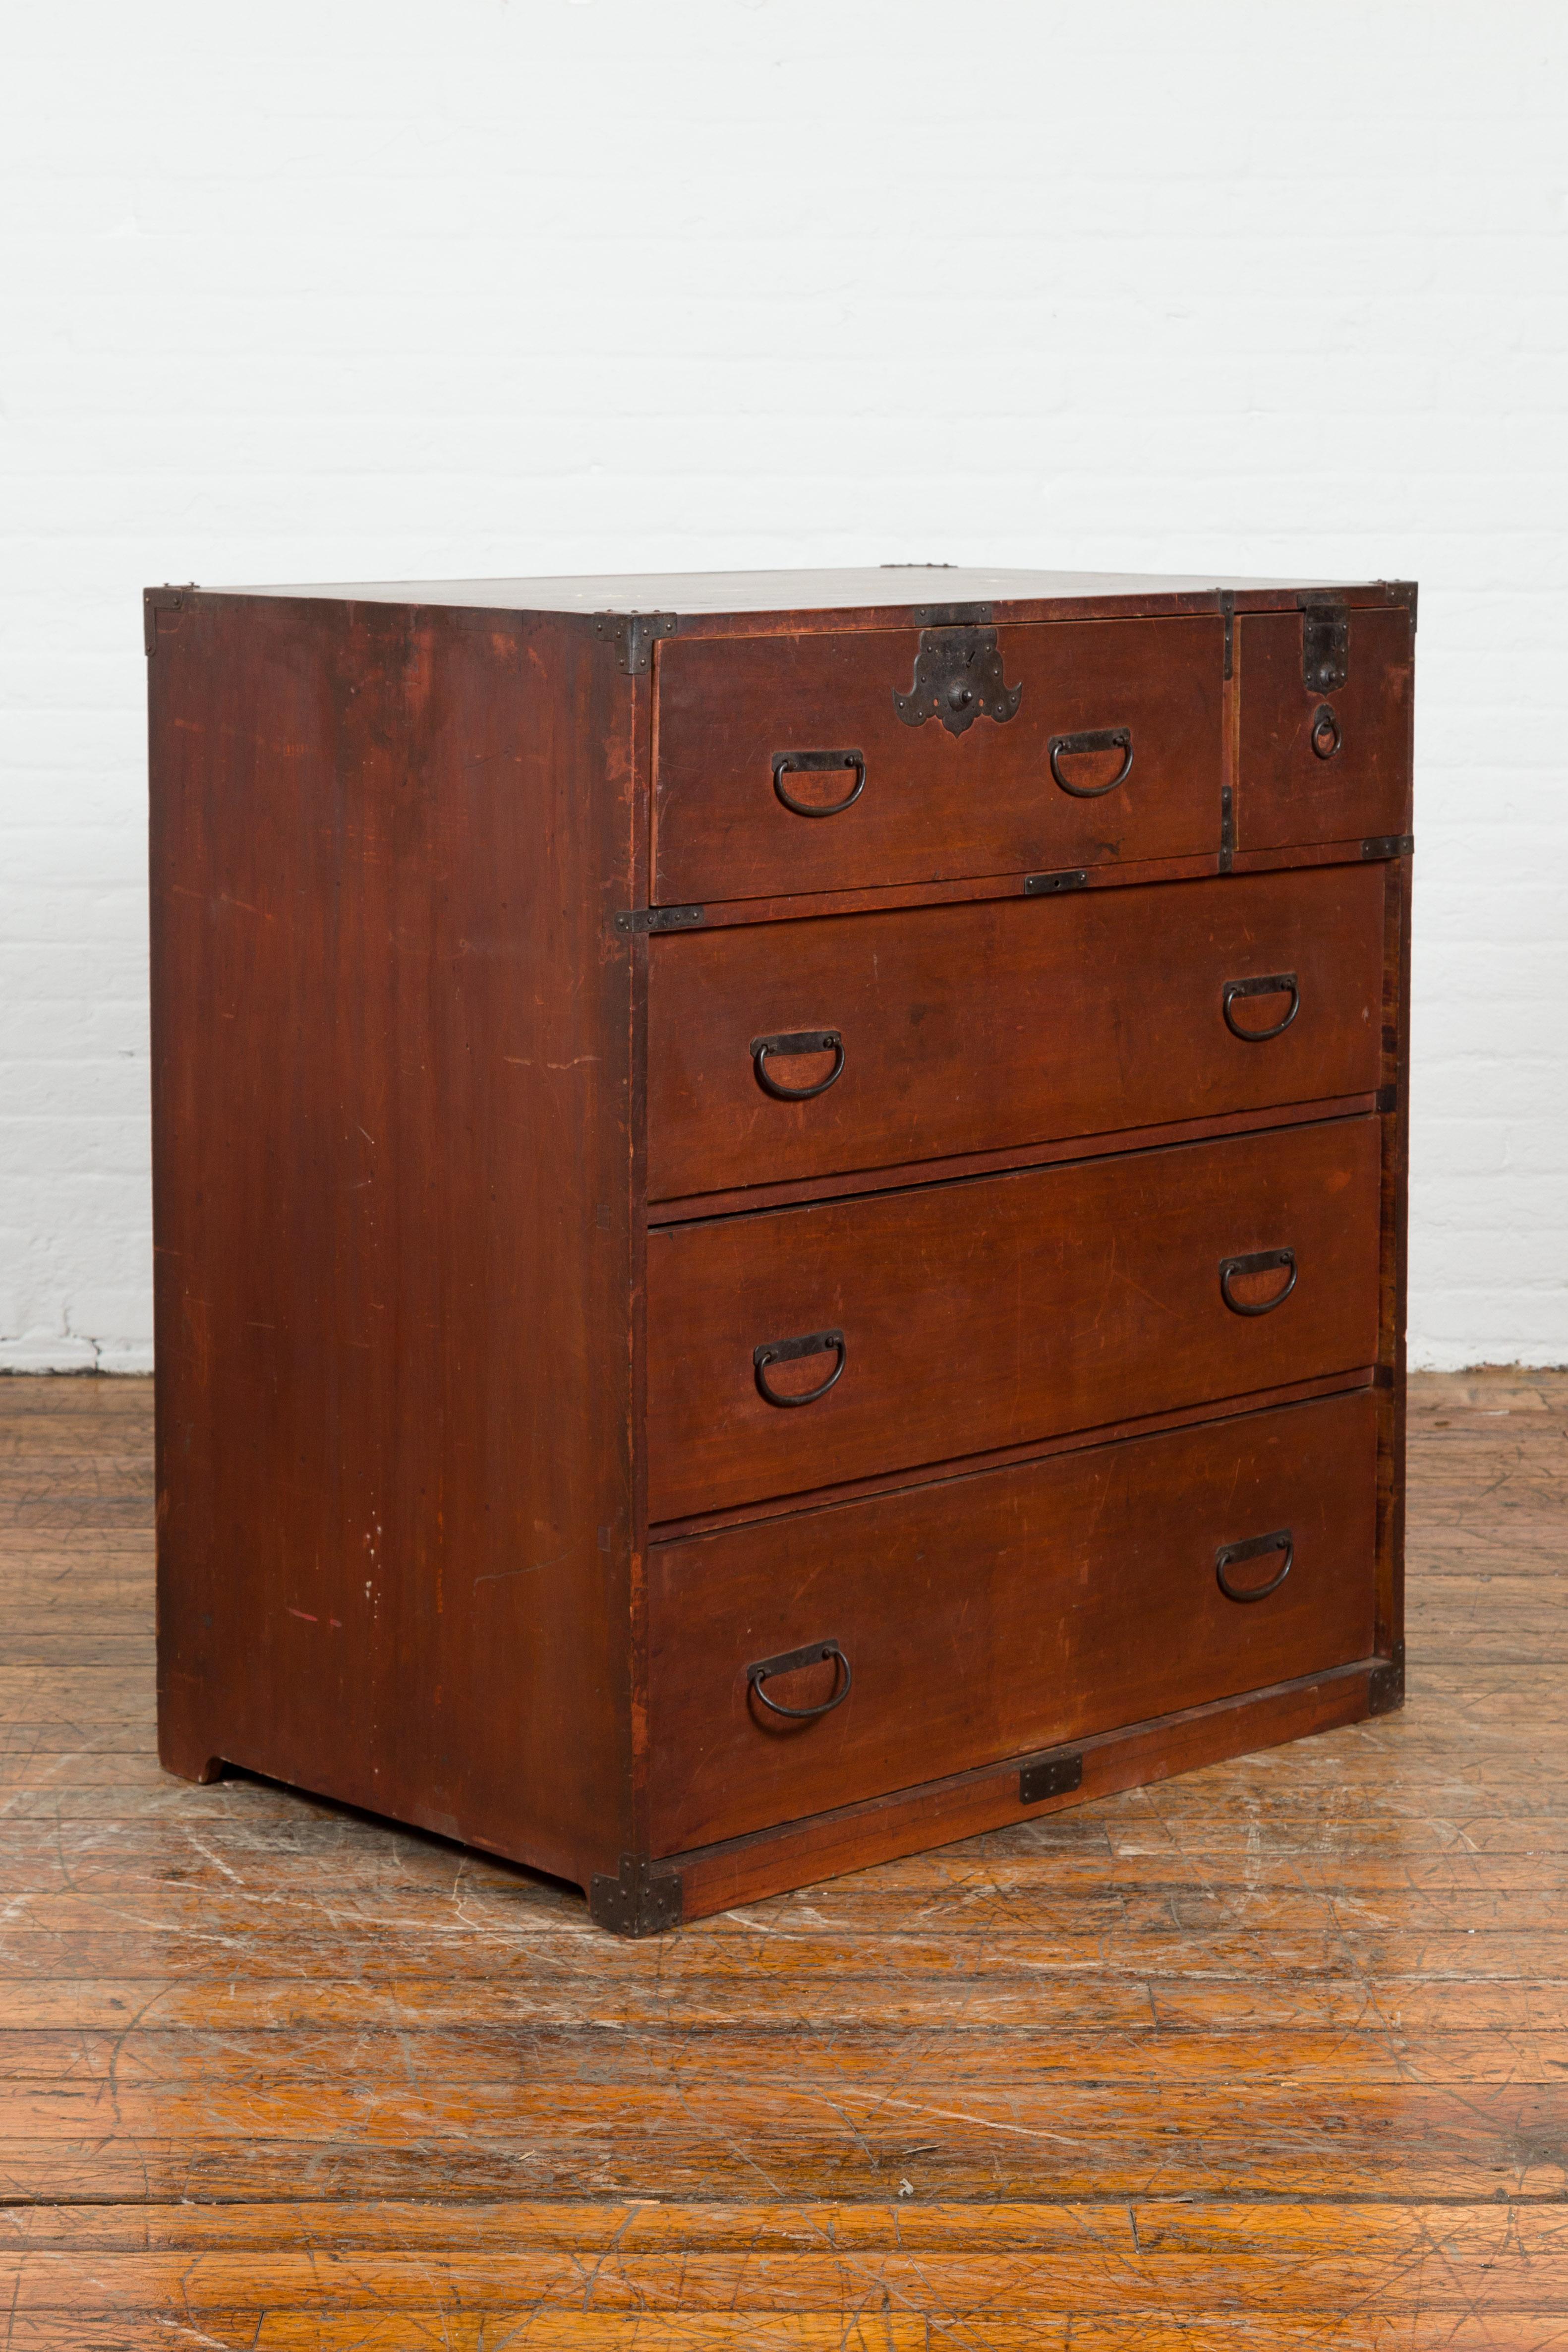 Taisho Japanese Taishō Period Early 20th Century Tansu Chest with Five Drawers For Sale